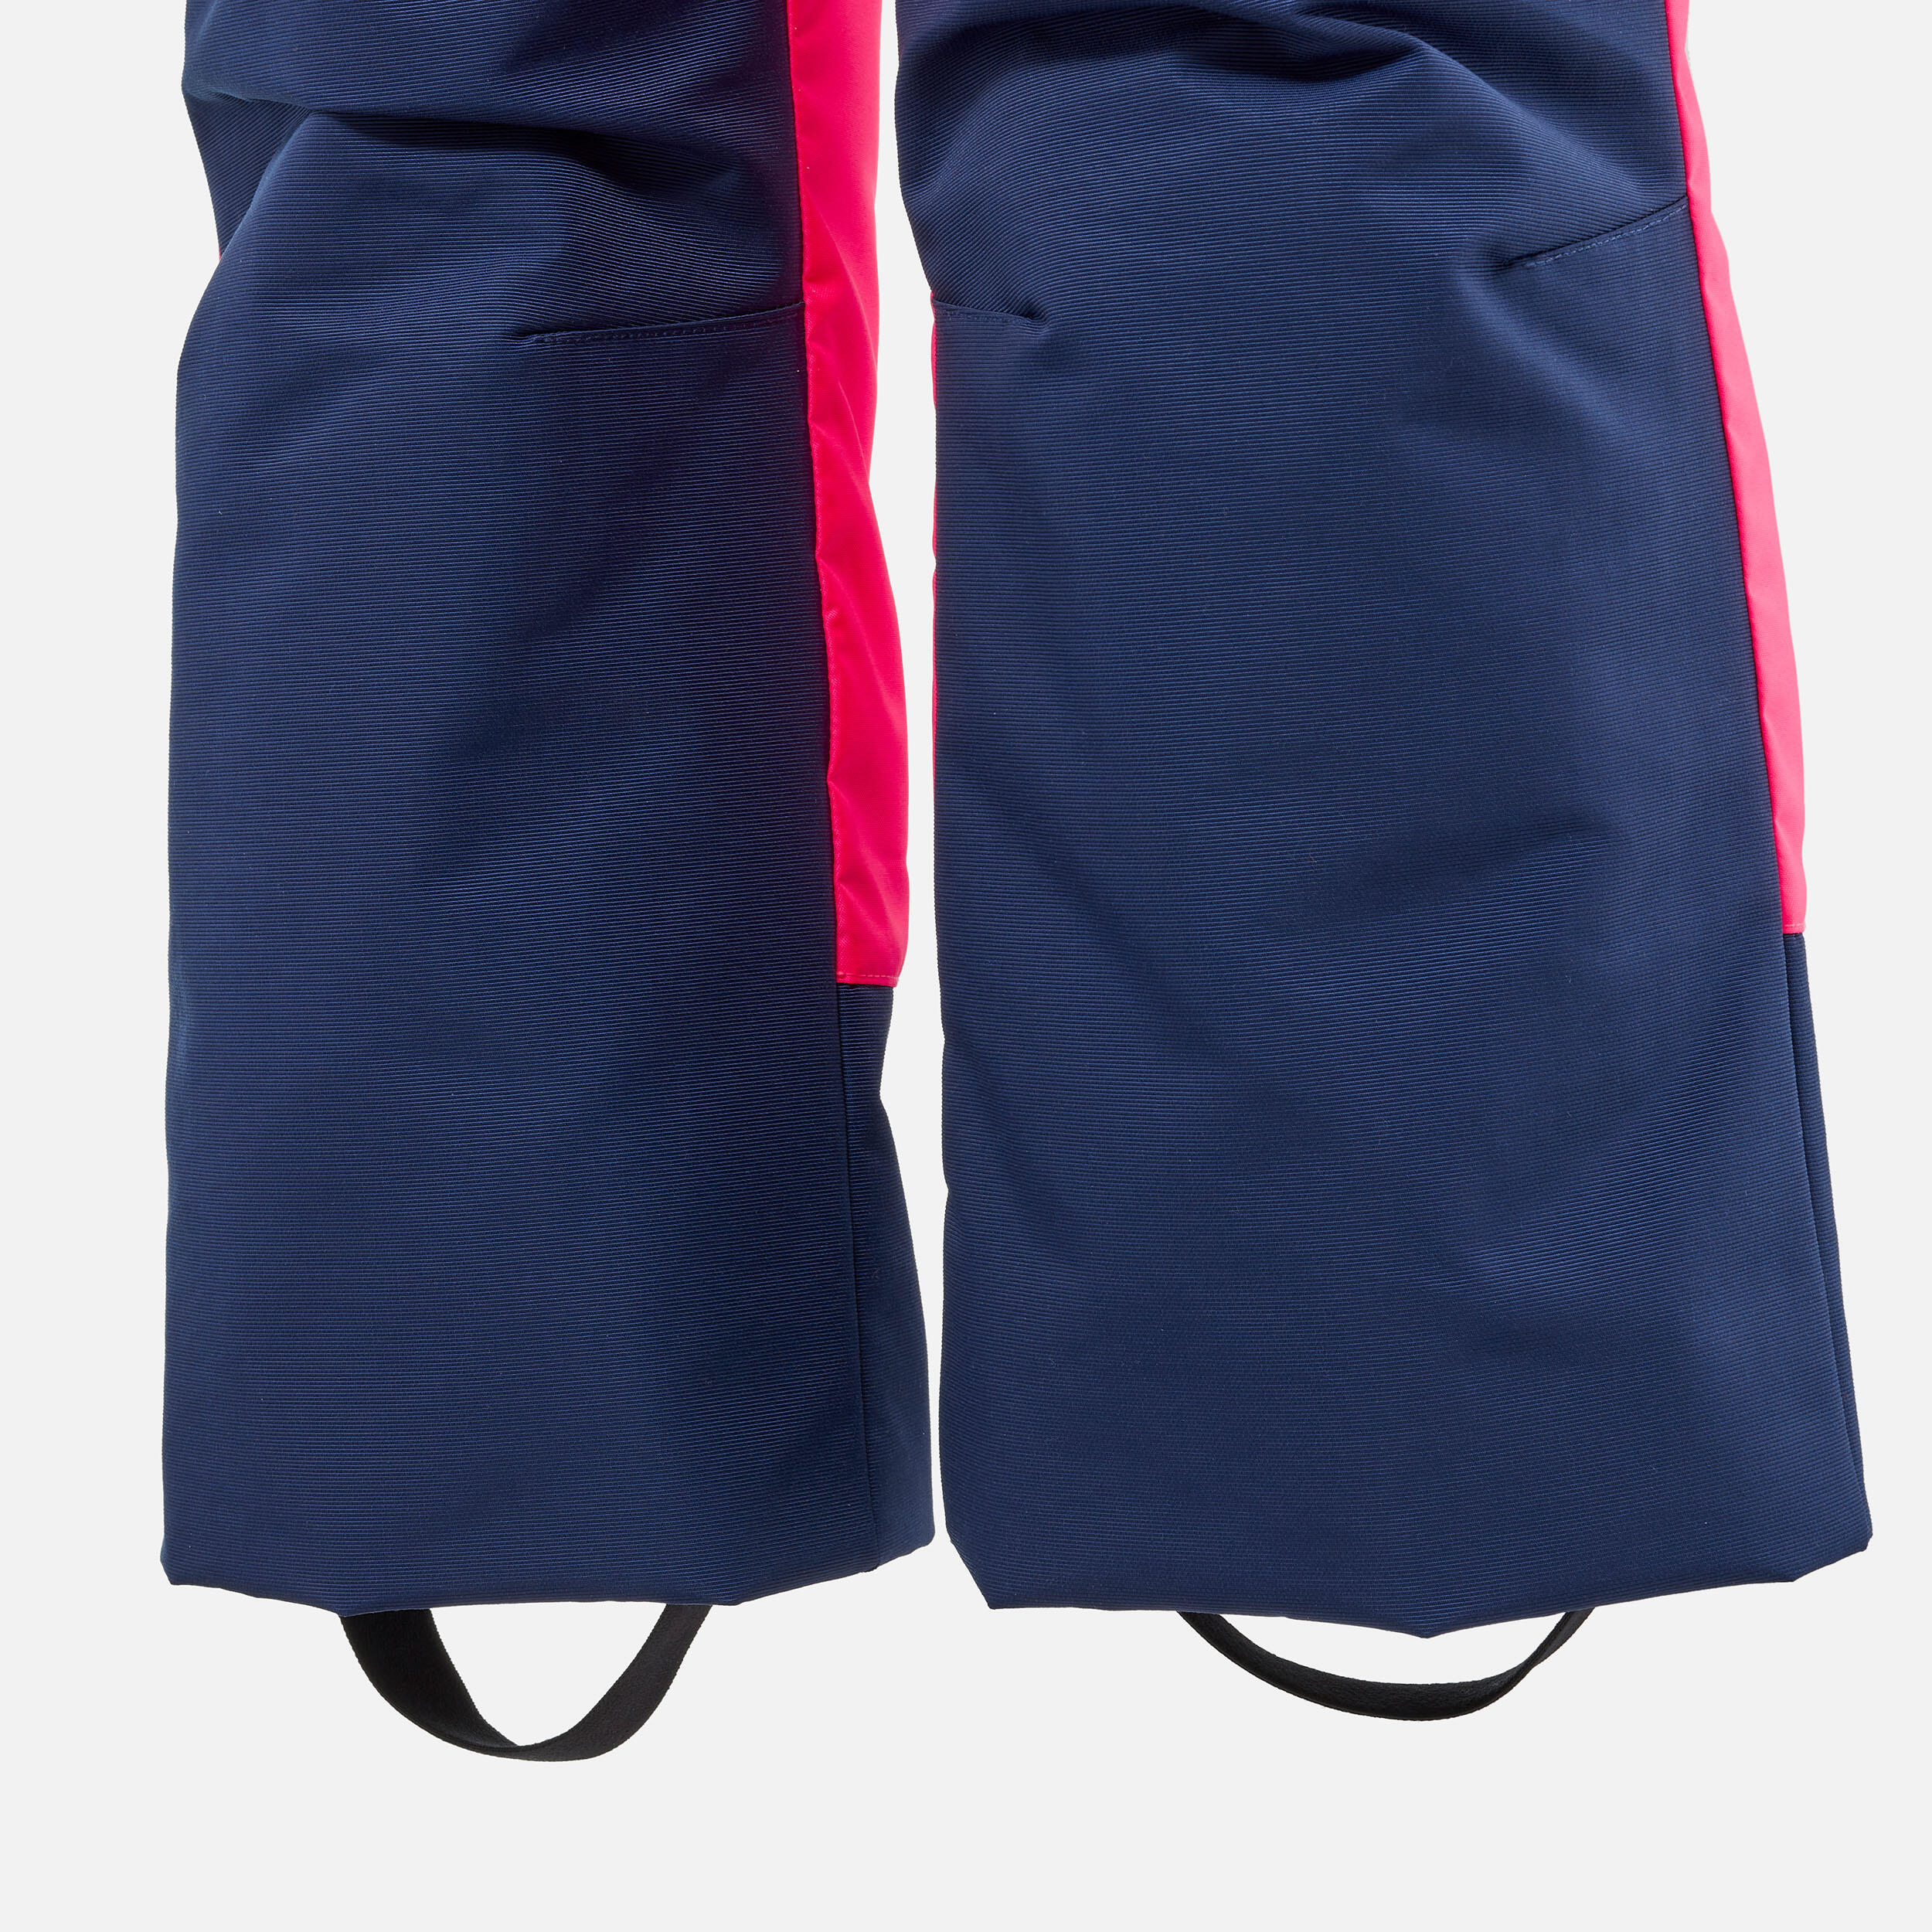 Kids’ Ski Pants with Removable Straps - PNF 900 Blue